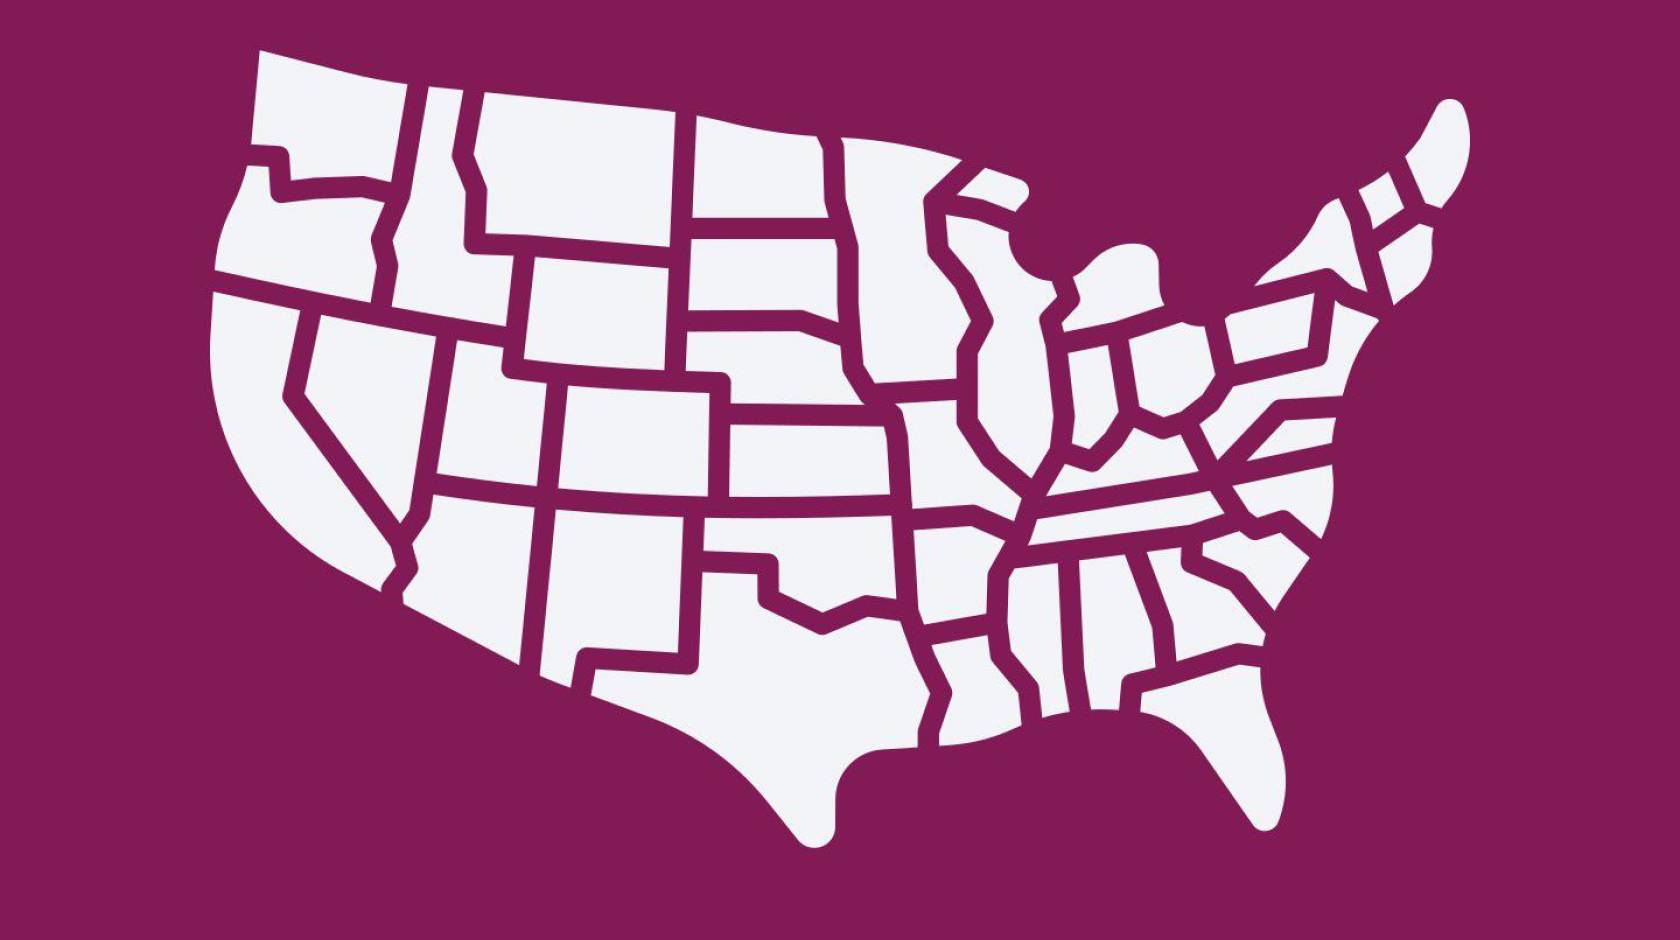 A map of the US on a magenta background